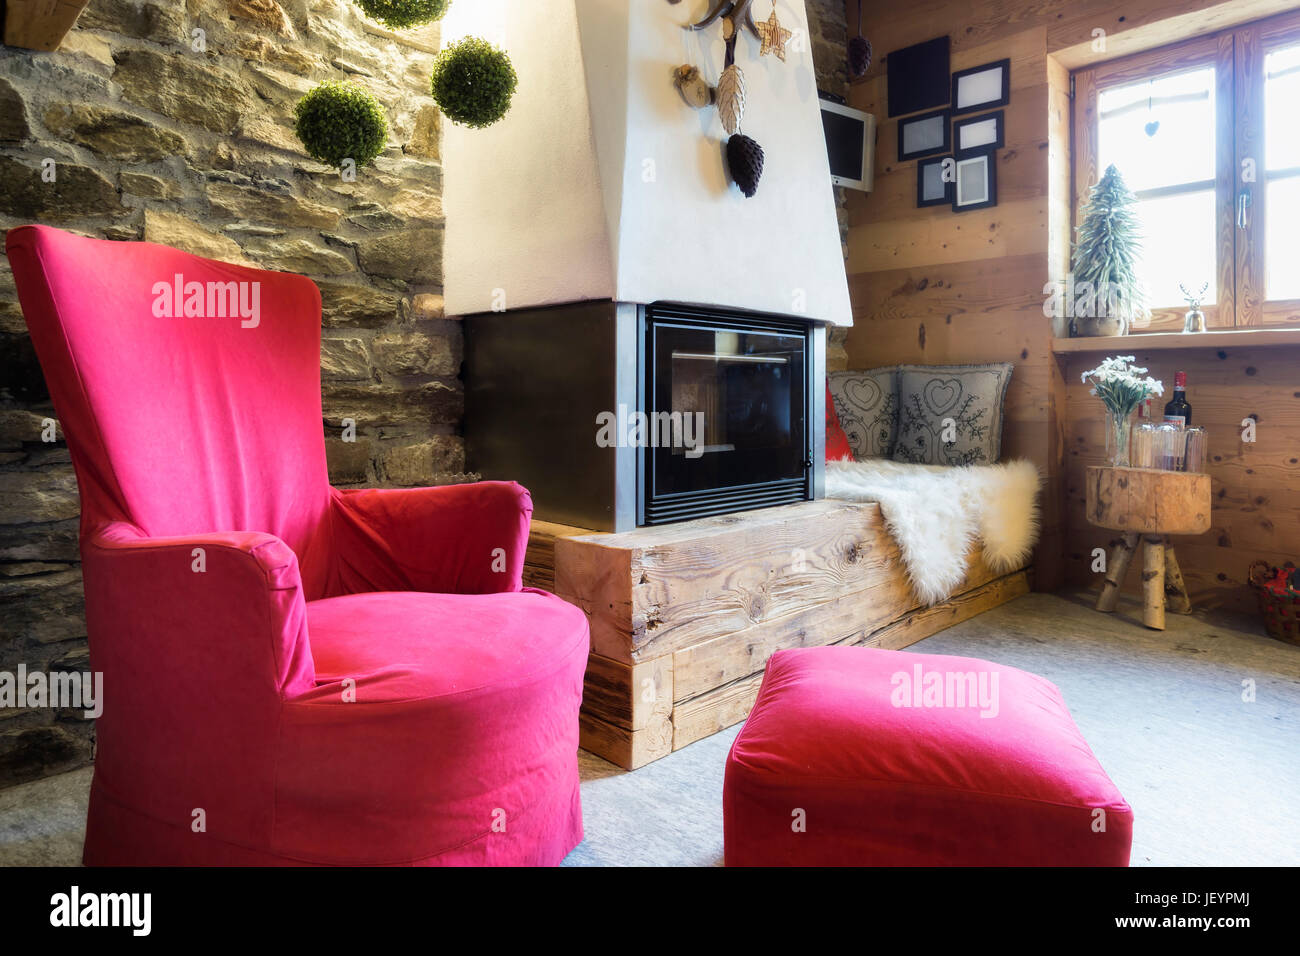 Cozy interior of a rustic chalet with modern fireplace Stock Photo